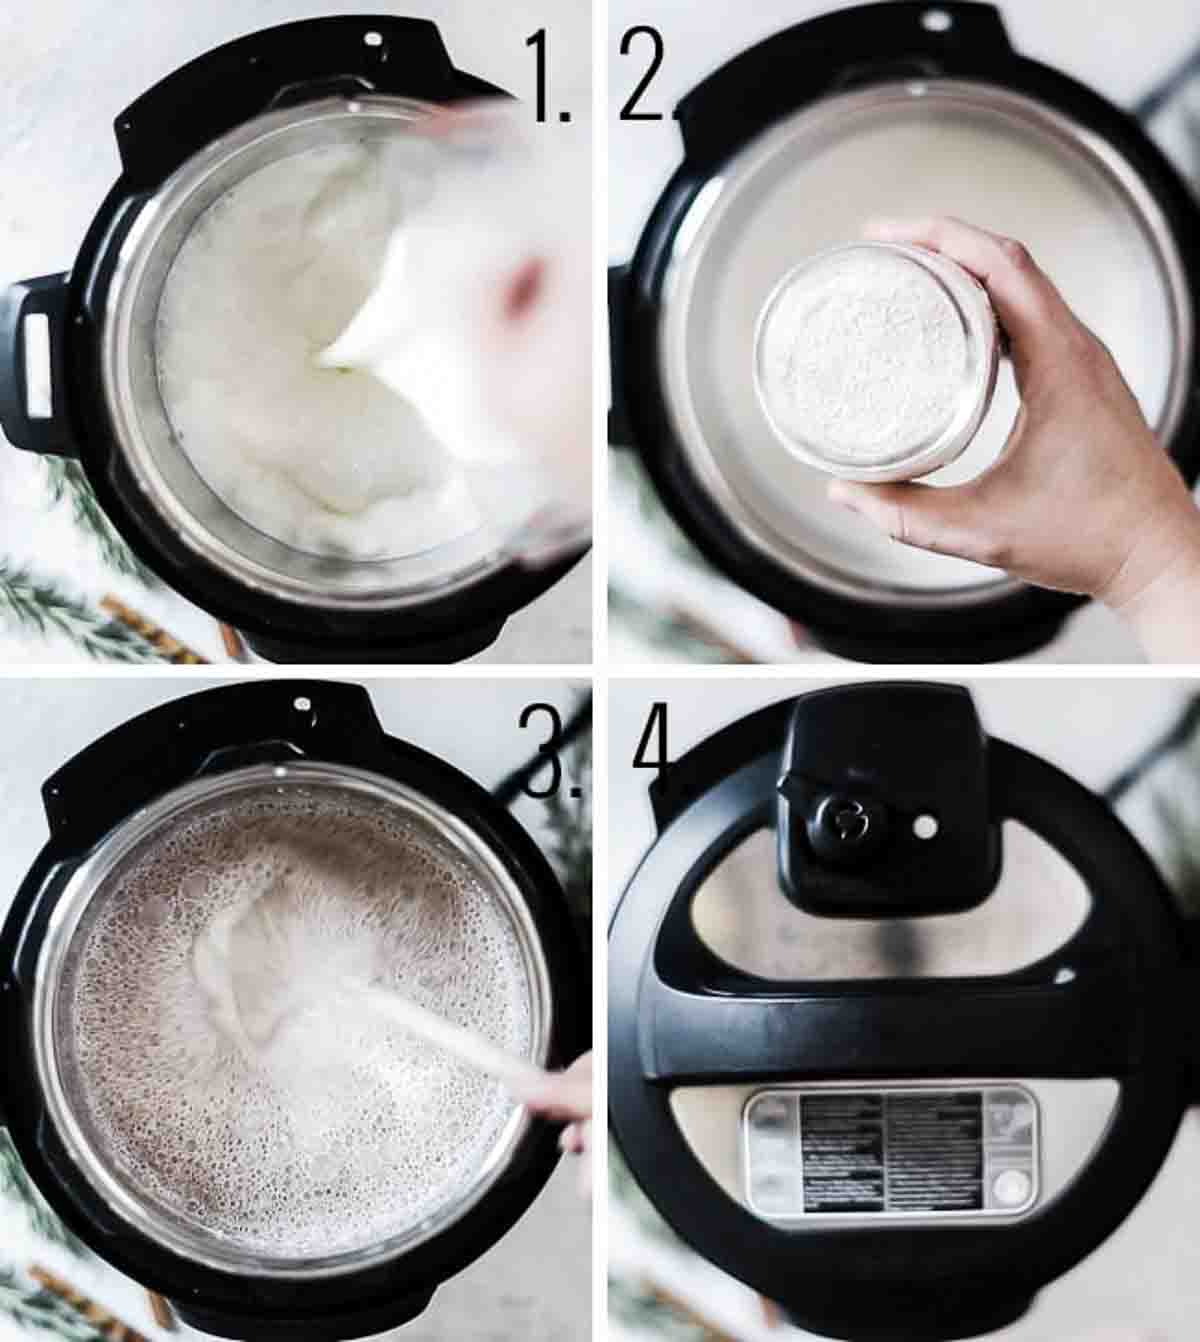 Collage showing how to make warm milk in the pressure cooker.